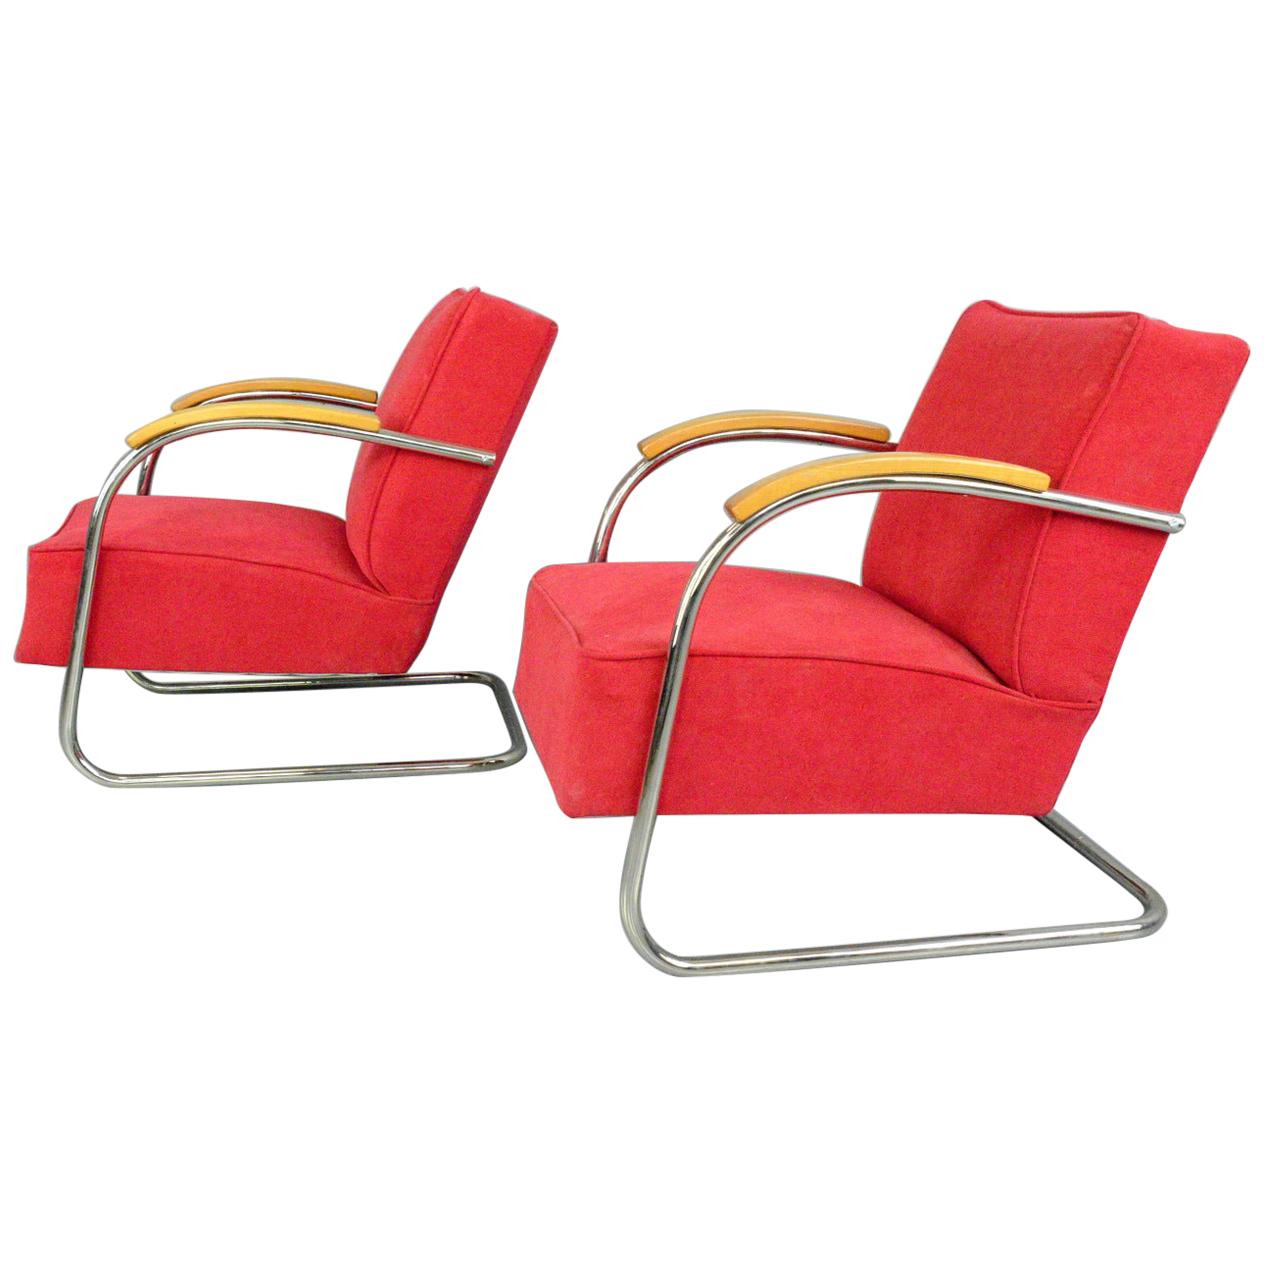 Bauhaus Armchairs by Mucke Melder, circa 1930s For Sale at 1stDibs